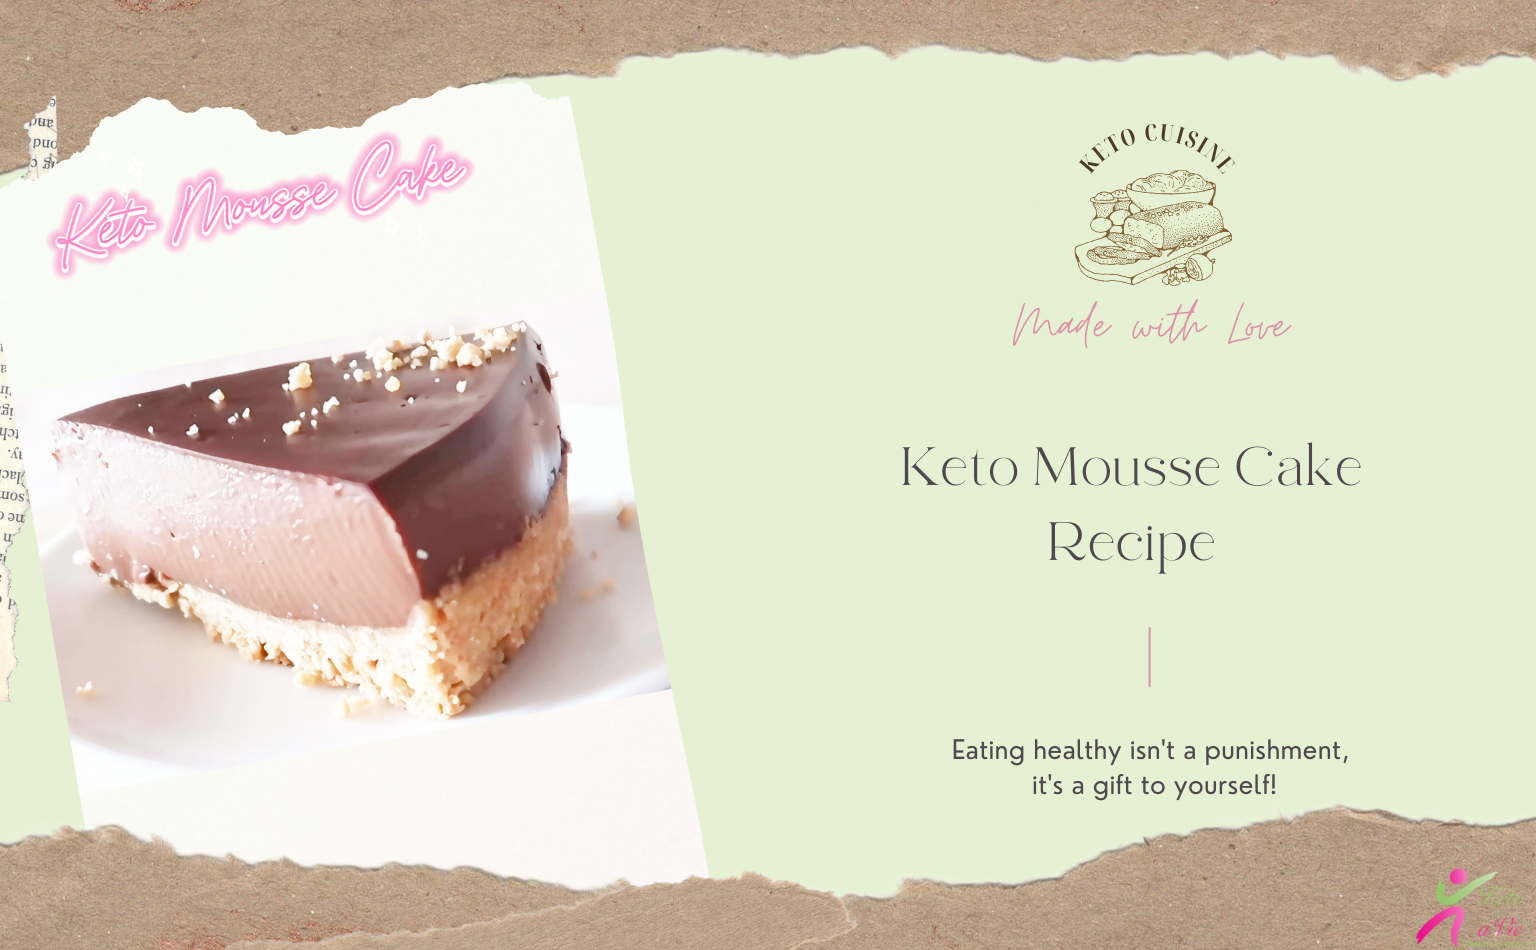 A Capture of a slice of the Keto Mousse Cake, sprinkled with Crushed Almond on top